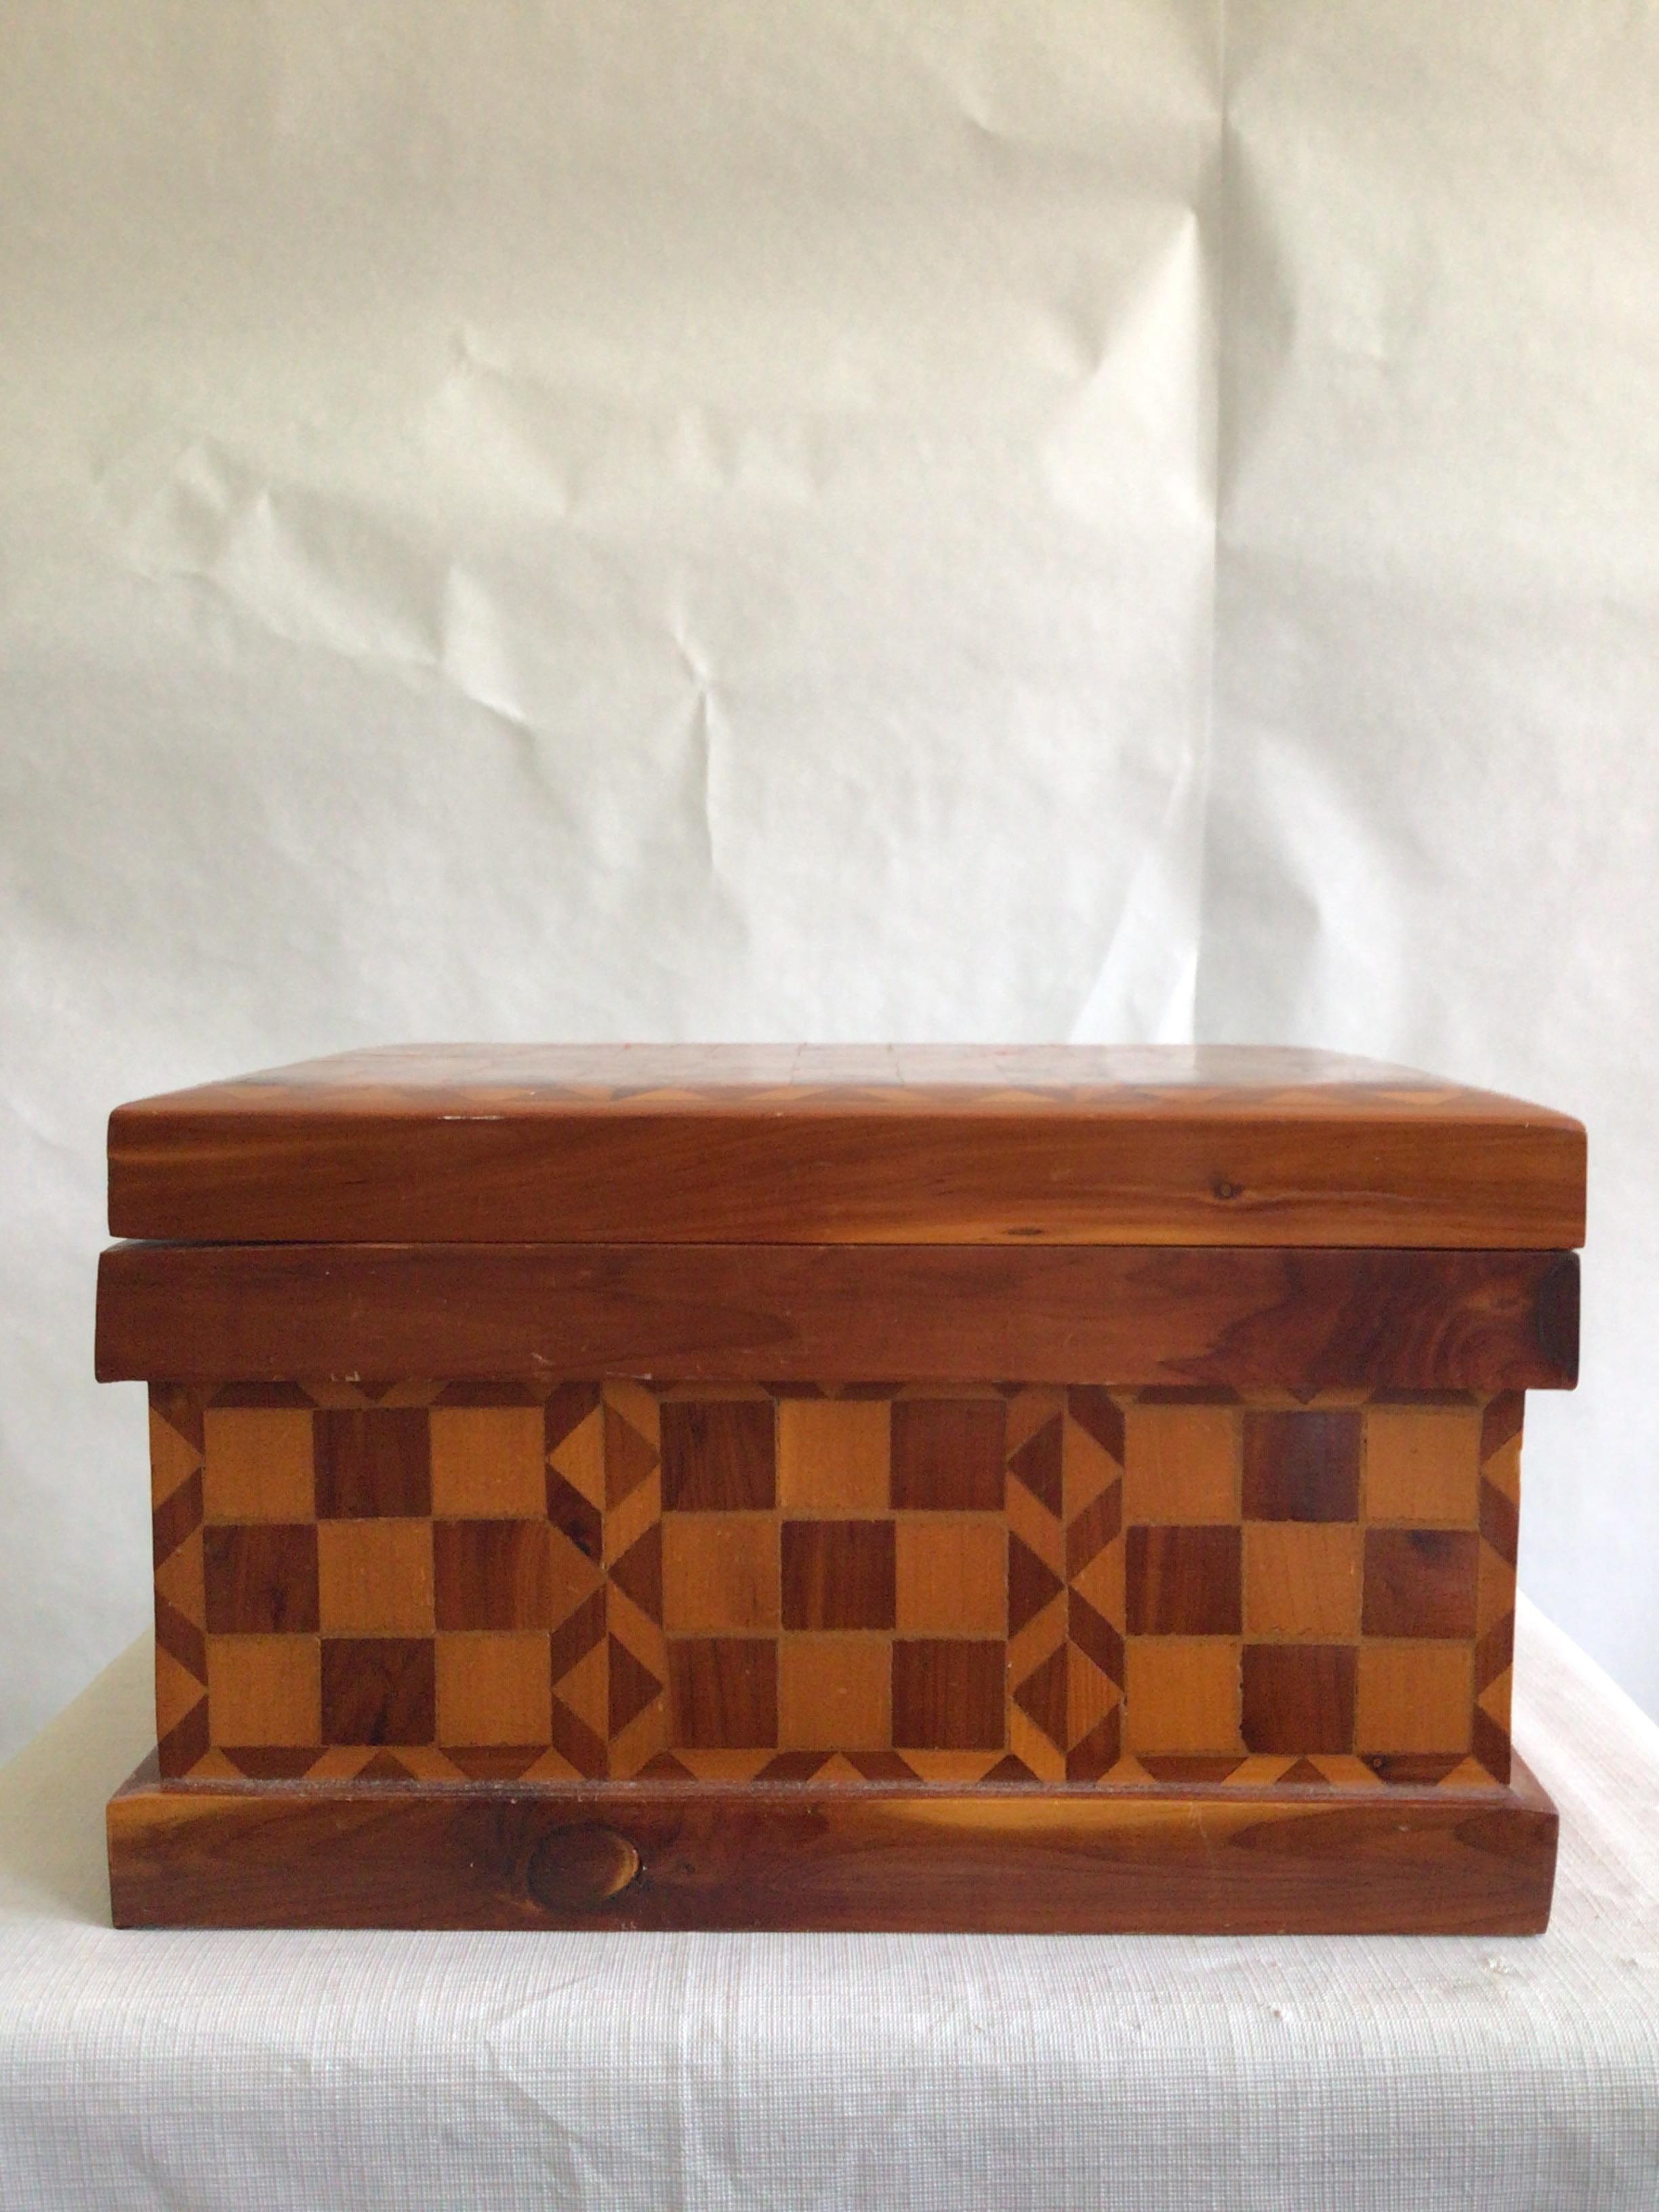 1940s Handmade Folk Art Checkered Inlayed Box
Checkered inlay design on all sides
Felt-lined interior
Unique hinges